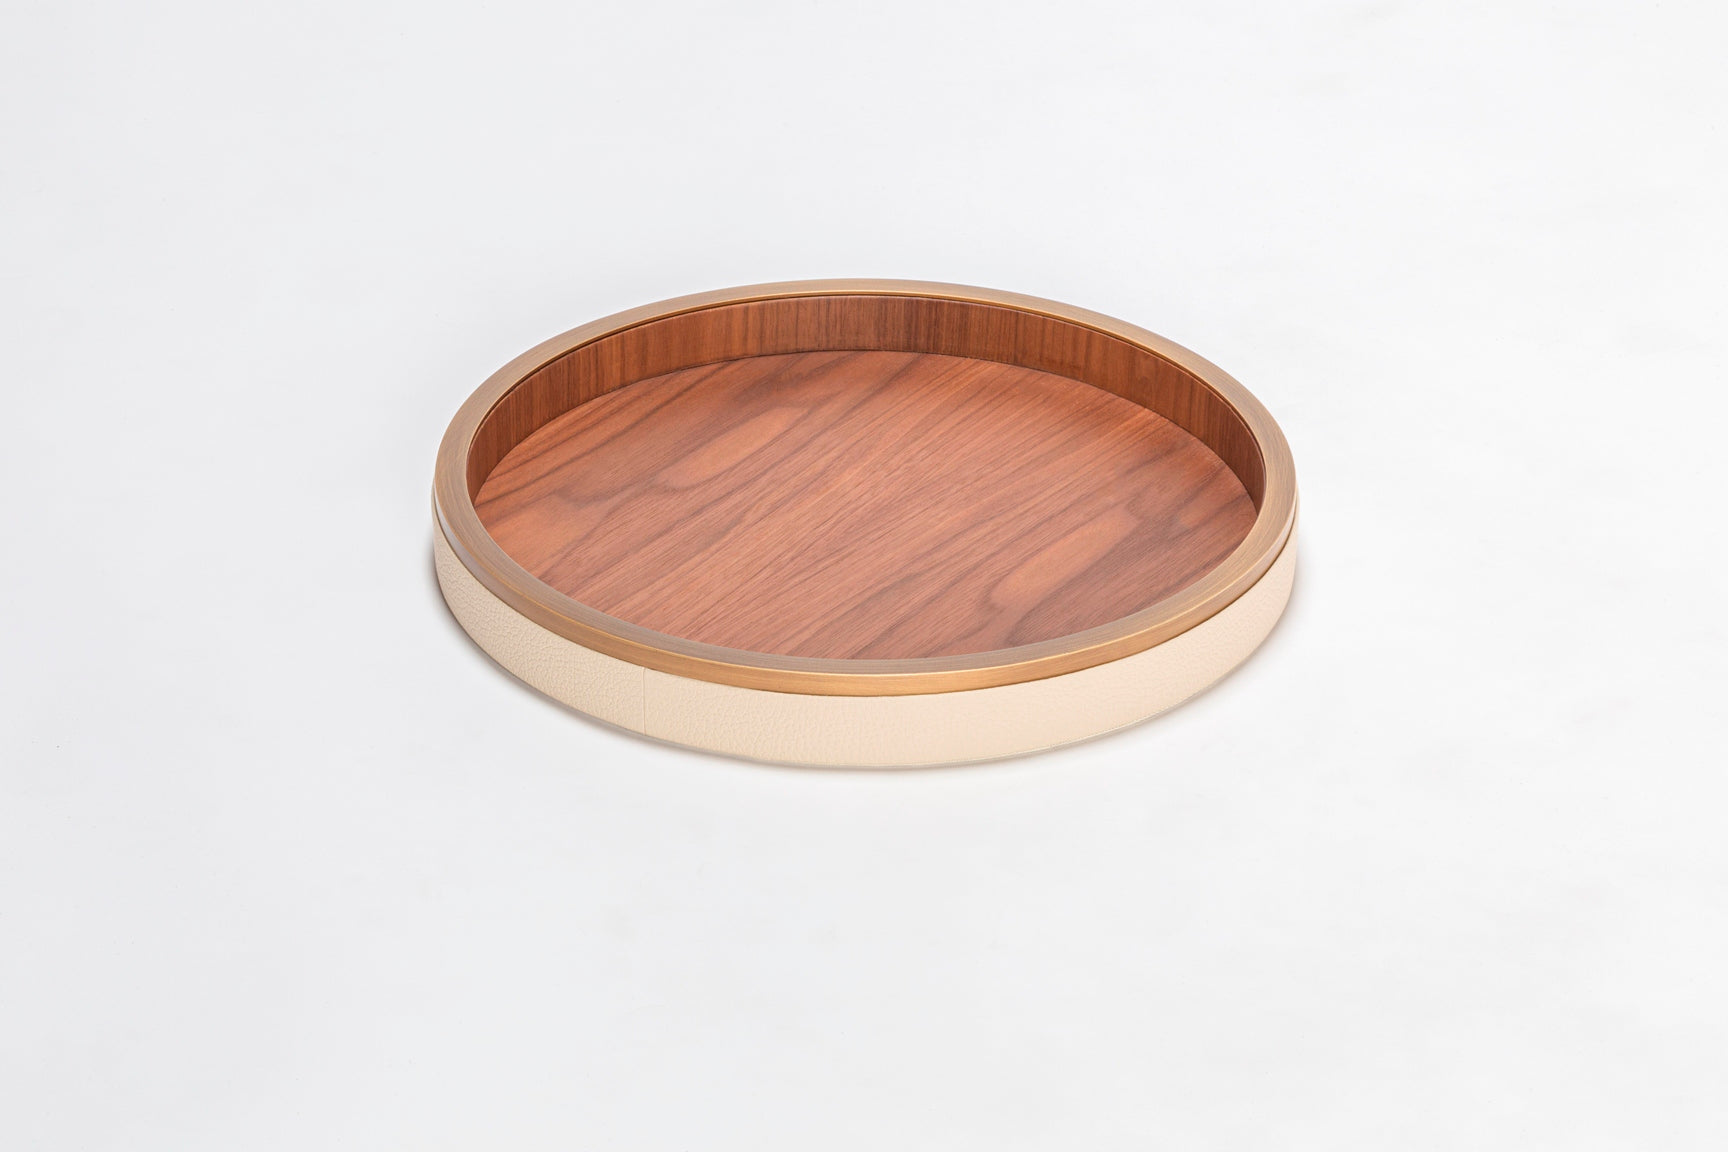 Riviere Dama Leather & Wood Round Tray | Partially Leather-Covered Wood Structure | Elegant and Functional Design | Perfect for Serving or Displaying Items | Explore Luxury Accessories at 2Jour Concierge, #1 luxury high-end gift & lifestyle shop